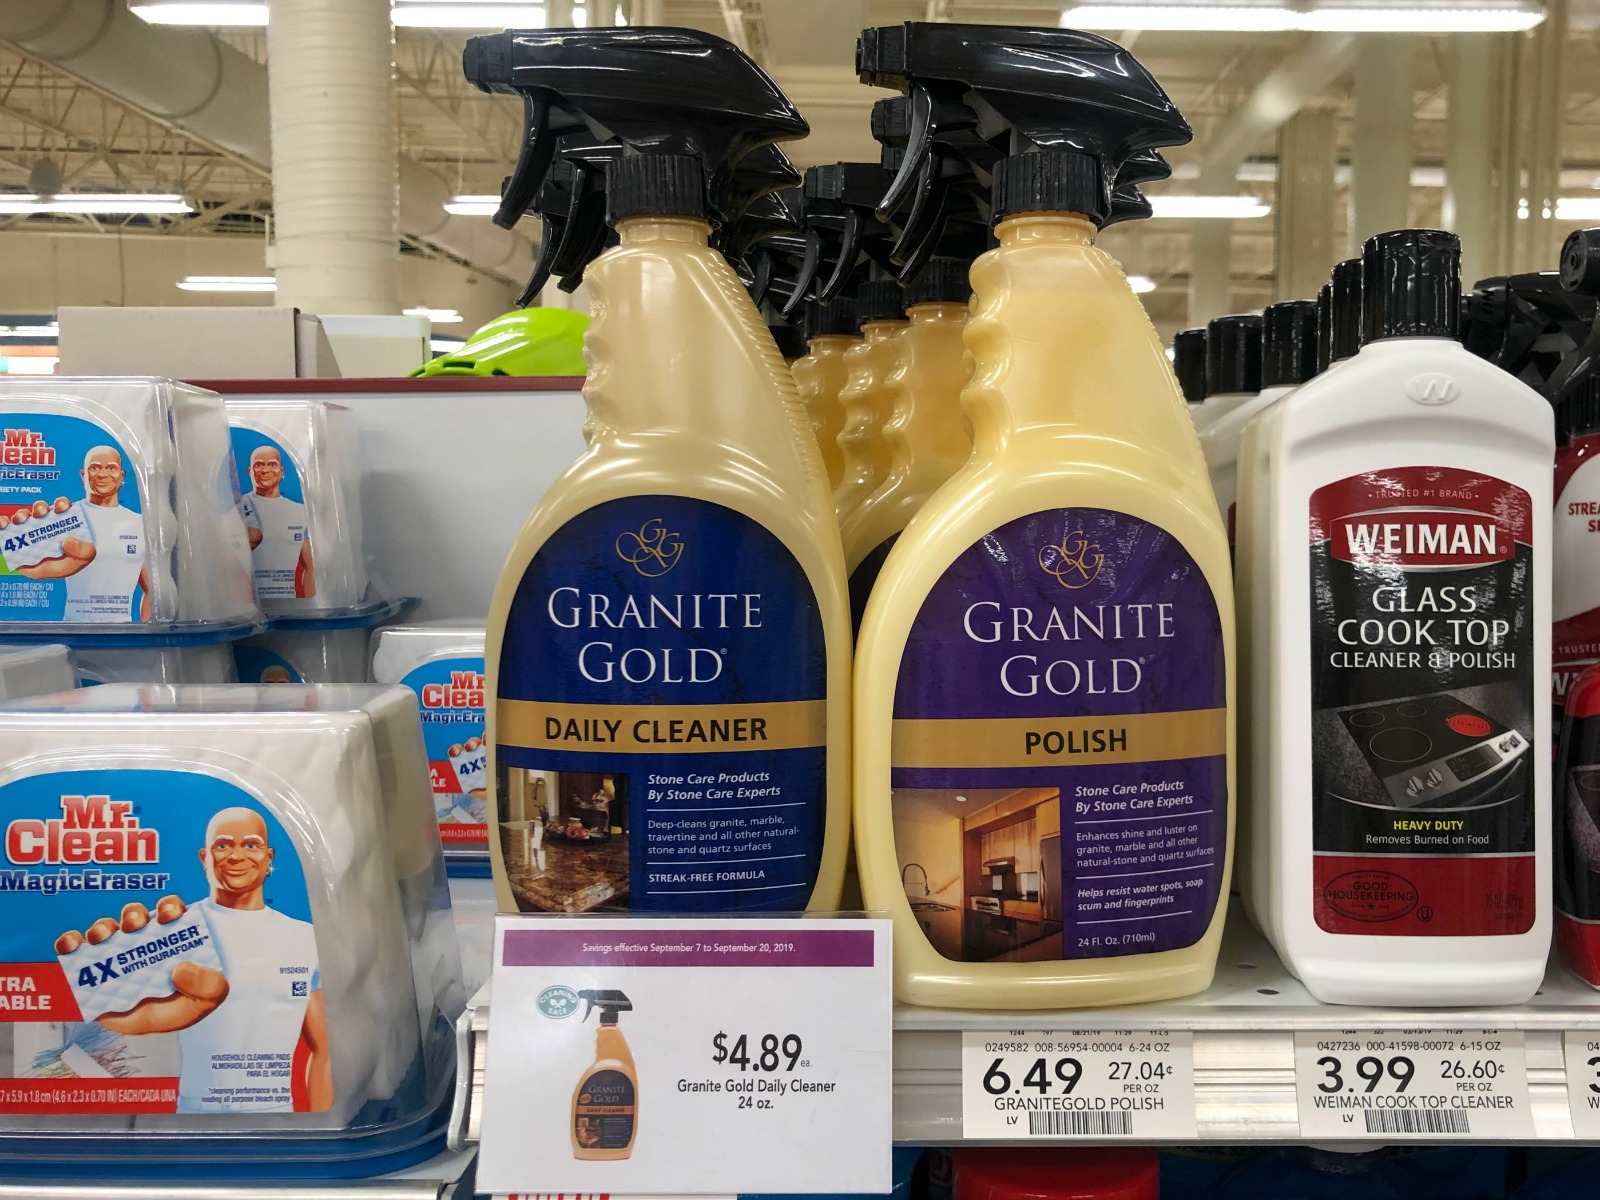 Save On Granite Gold Daily Cleaner® At Publix Through 9/20 on I Heart Publix